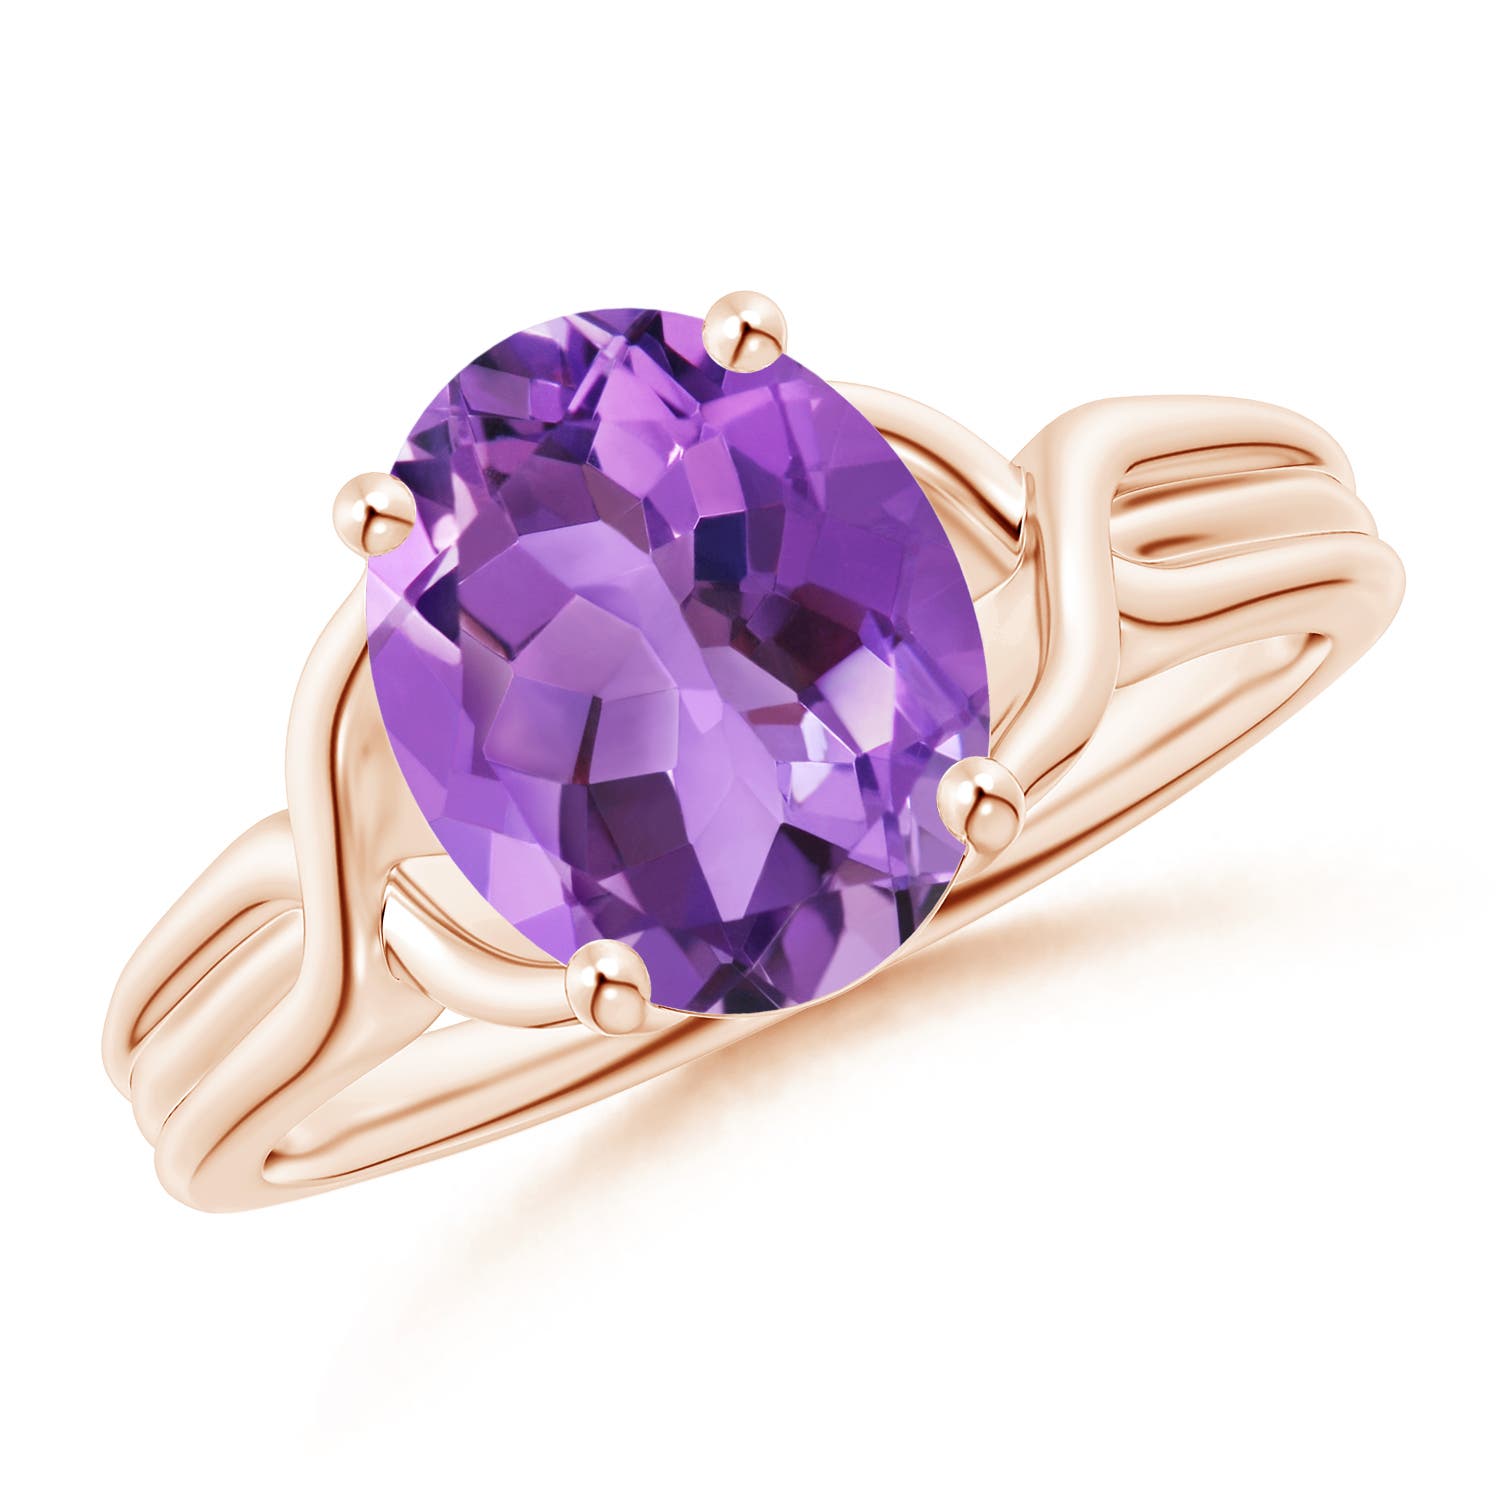 AA - Amethyst / 2.28 CT / 14 KT Rose Gold